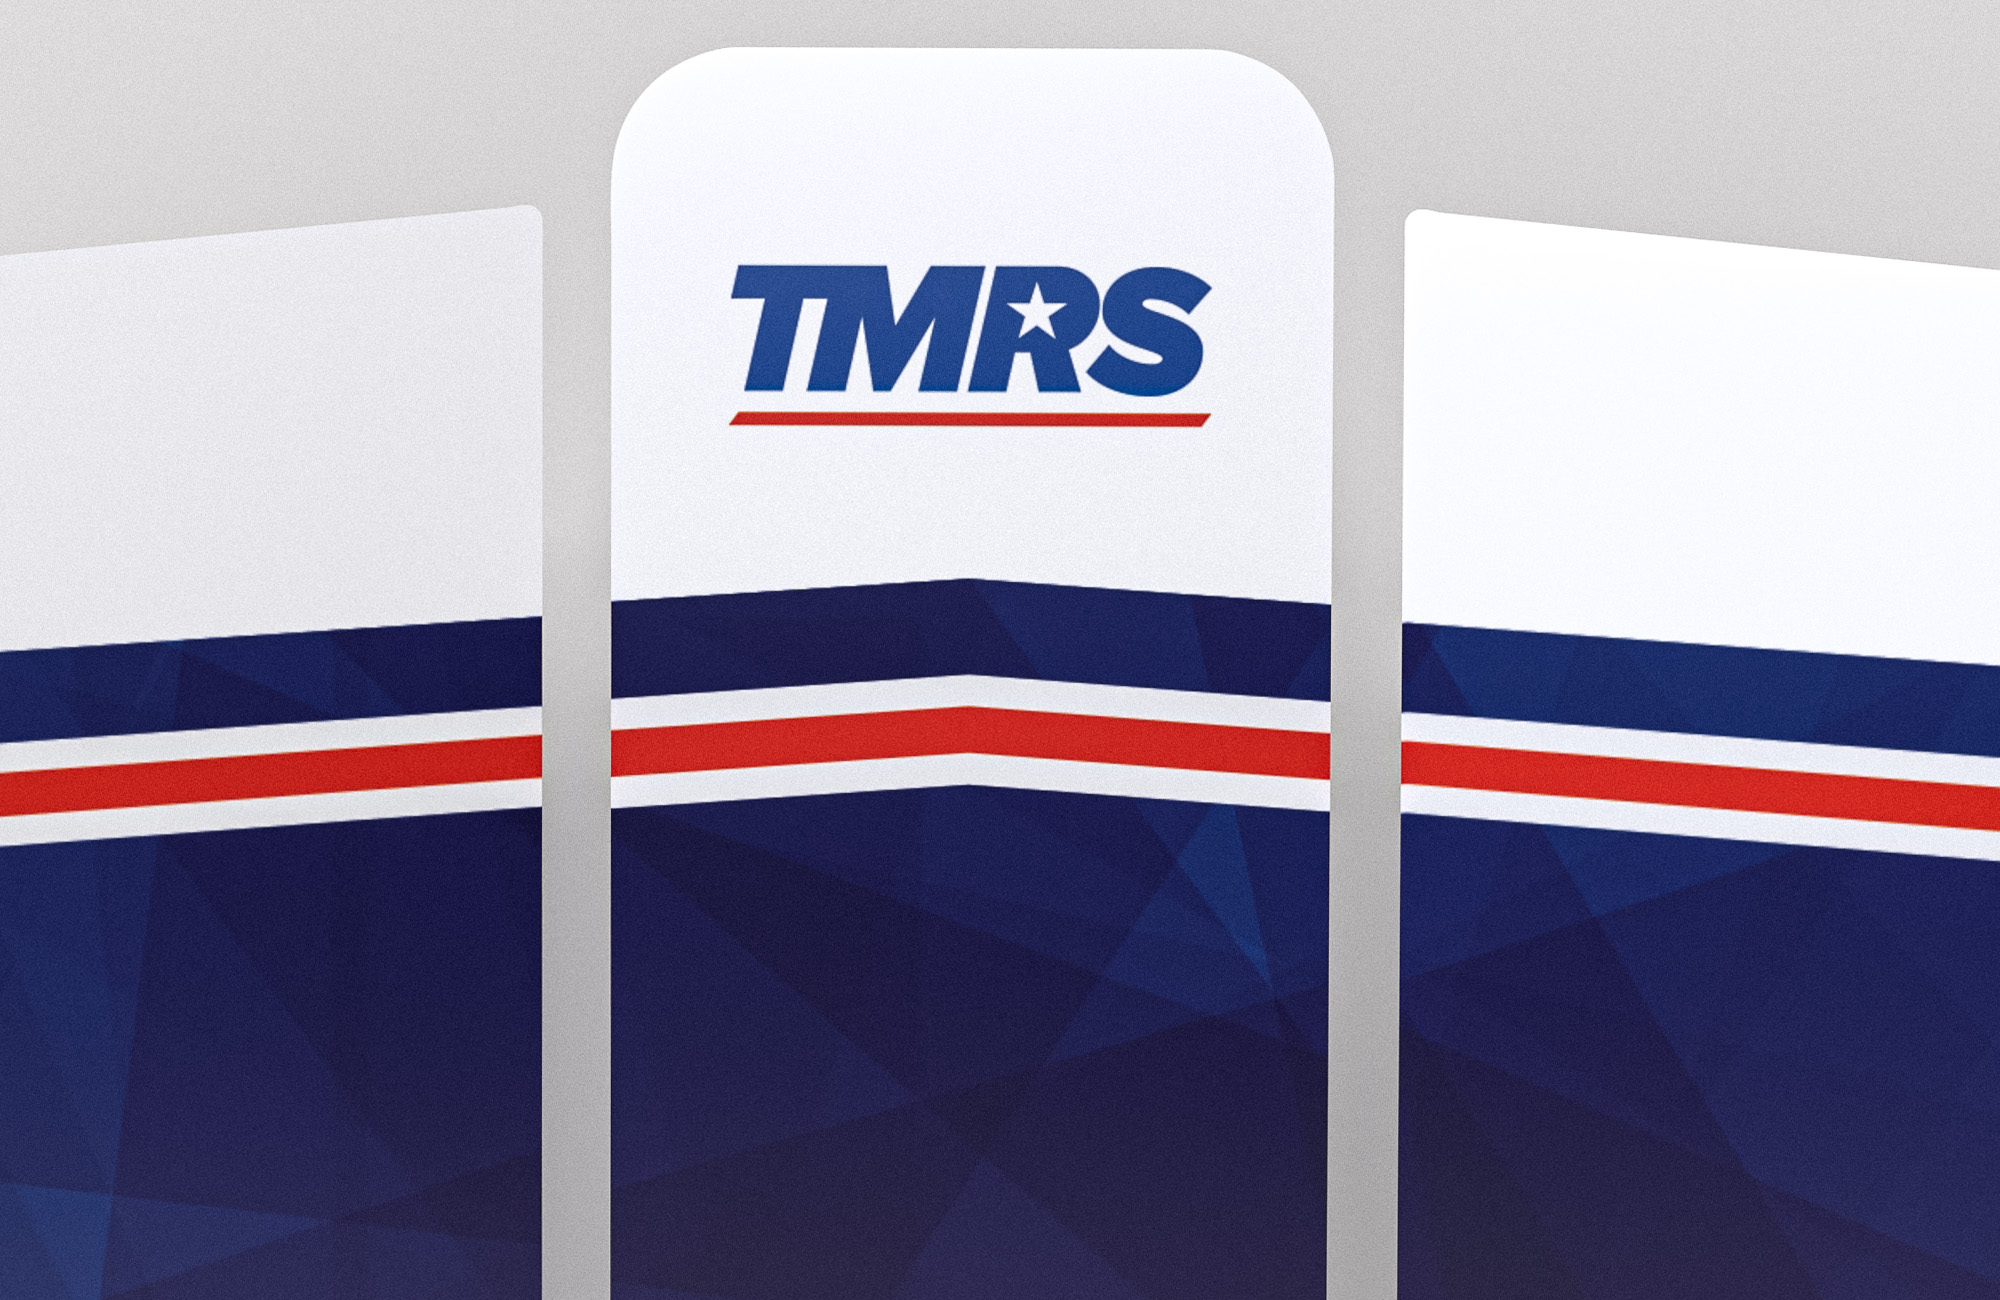 A close up view of a booth that displays in three parts. The middle panel displays the TMRS logo at the top. class=